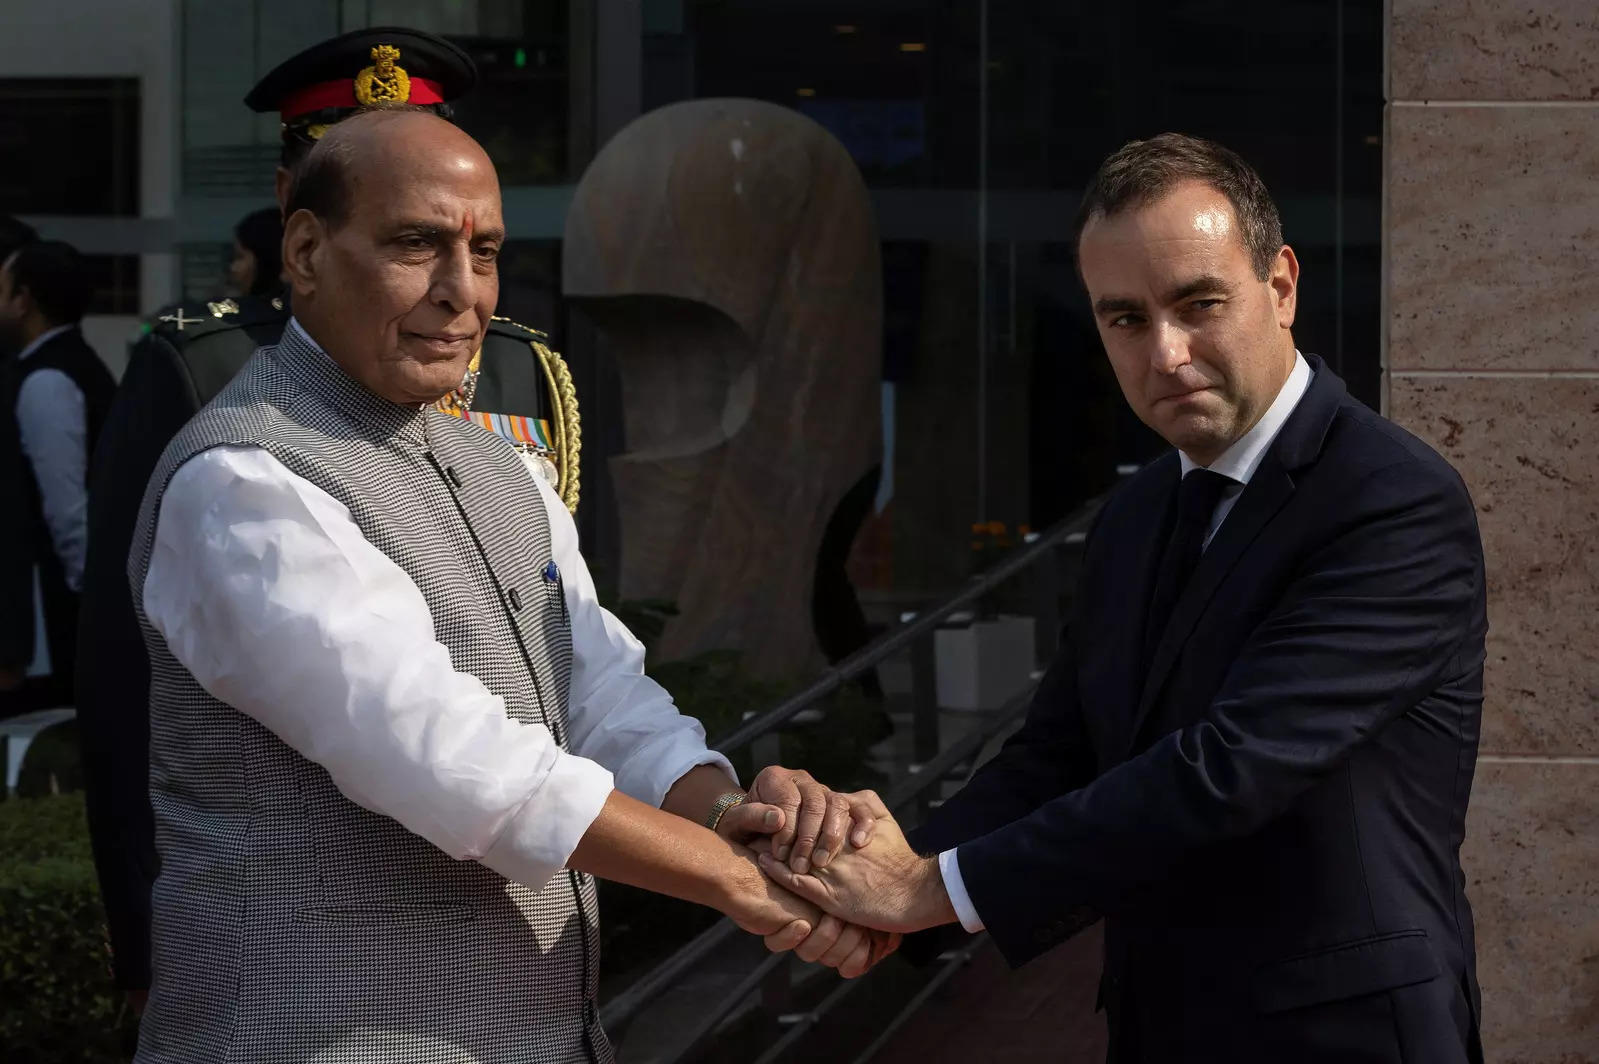 French defence minister Sebastien Lecornu (right) shakes hands with his Indian counterpart Rajnath Singh during a ceremonial reception in New Delhi.